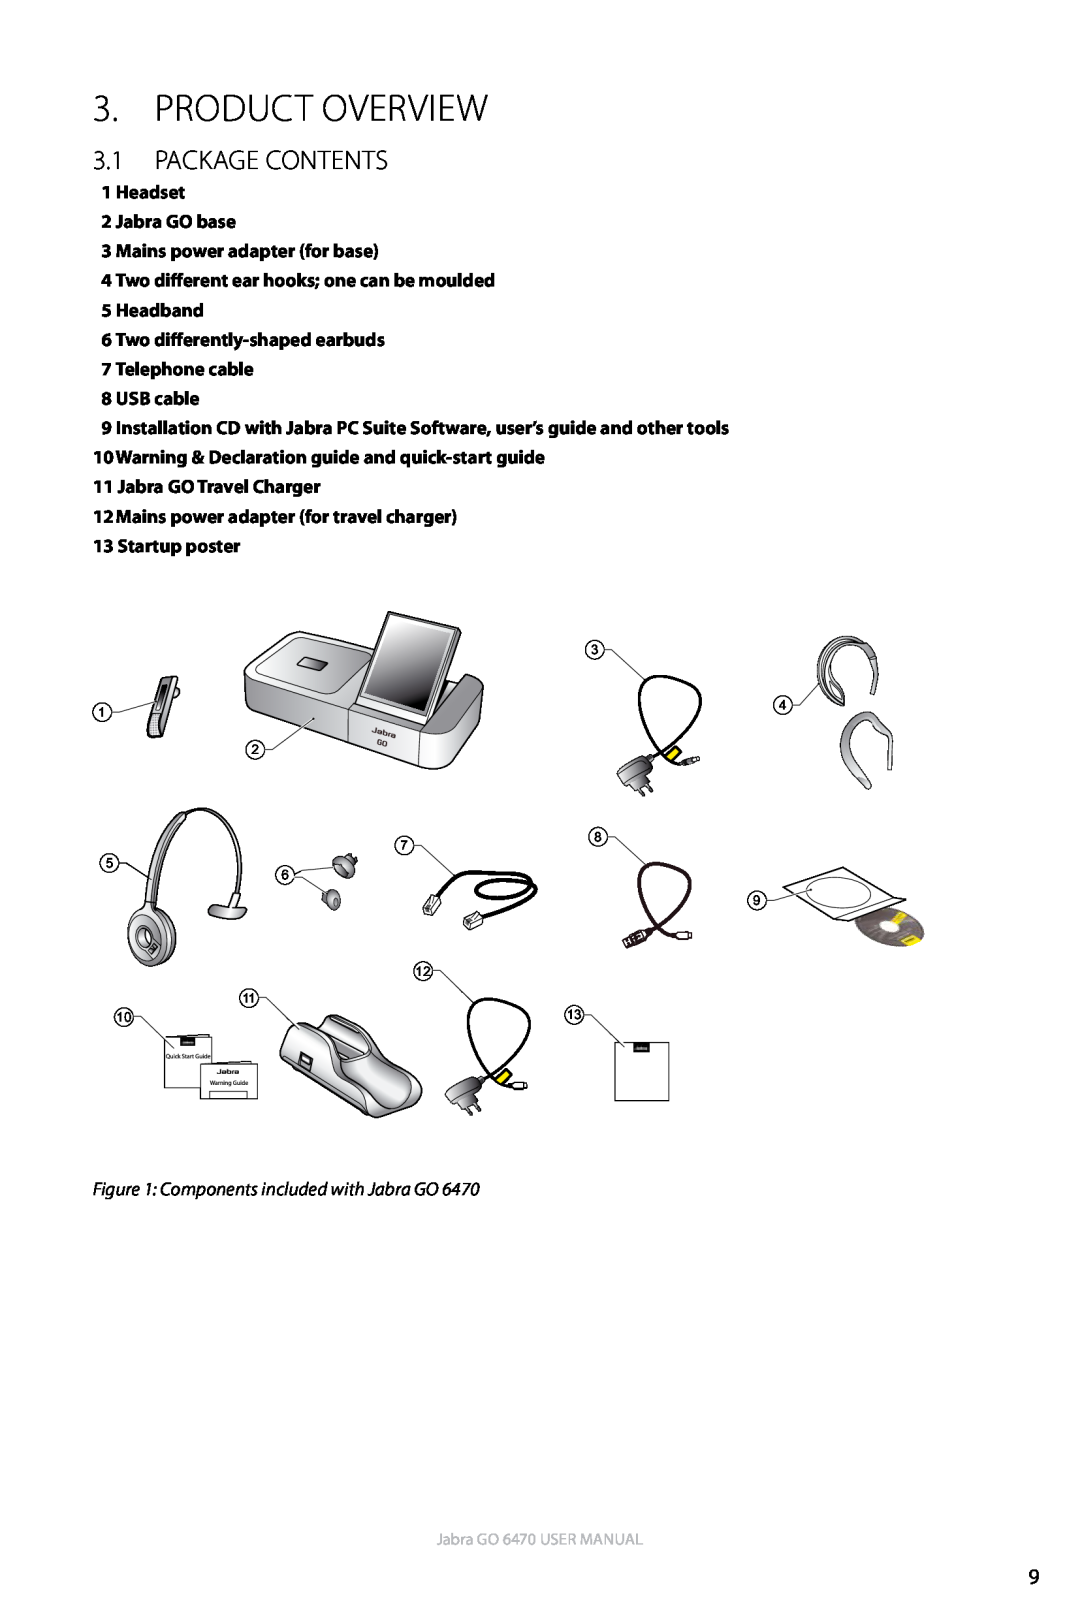 Jabra GO 6470 user manual Product Overview, 3.1Package Contents, 1Headset 2Jabra GO base, 3Mains power adapter for base 